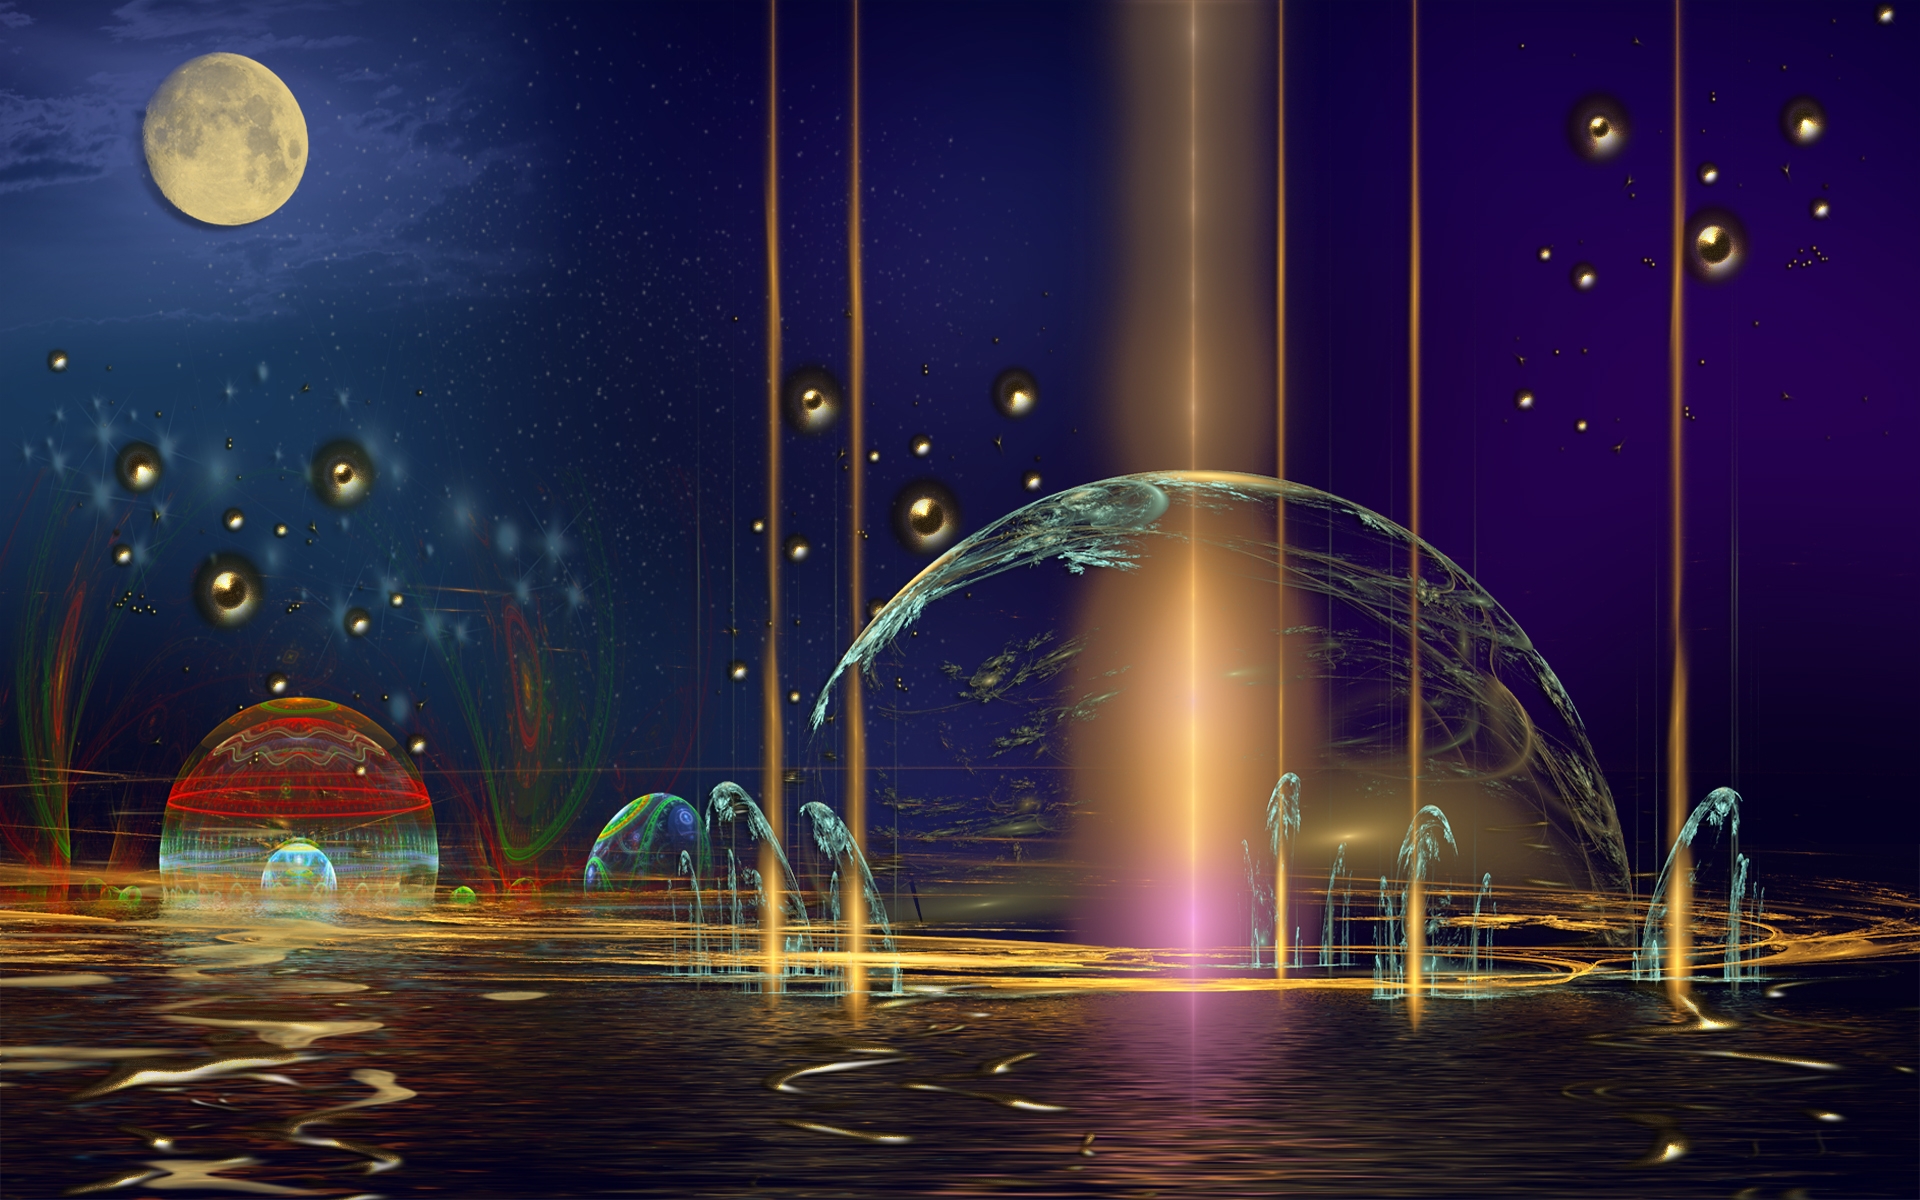 Wallpaper : light, pattern, fantasy, imagination 1920x1080 - CoolWallpapers  - 679586 - HD Wallpapers - WallHere